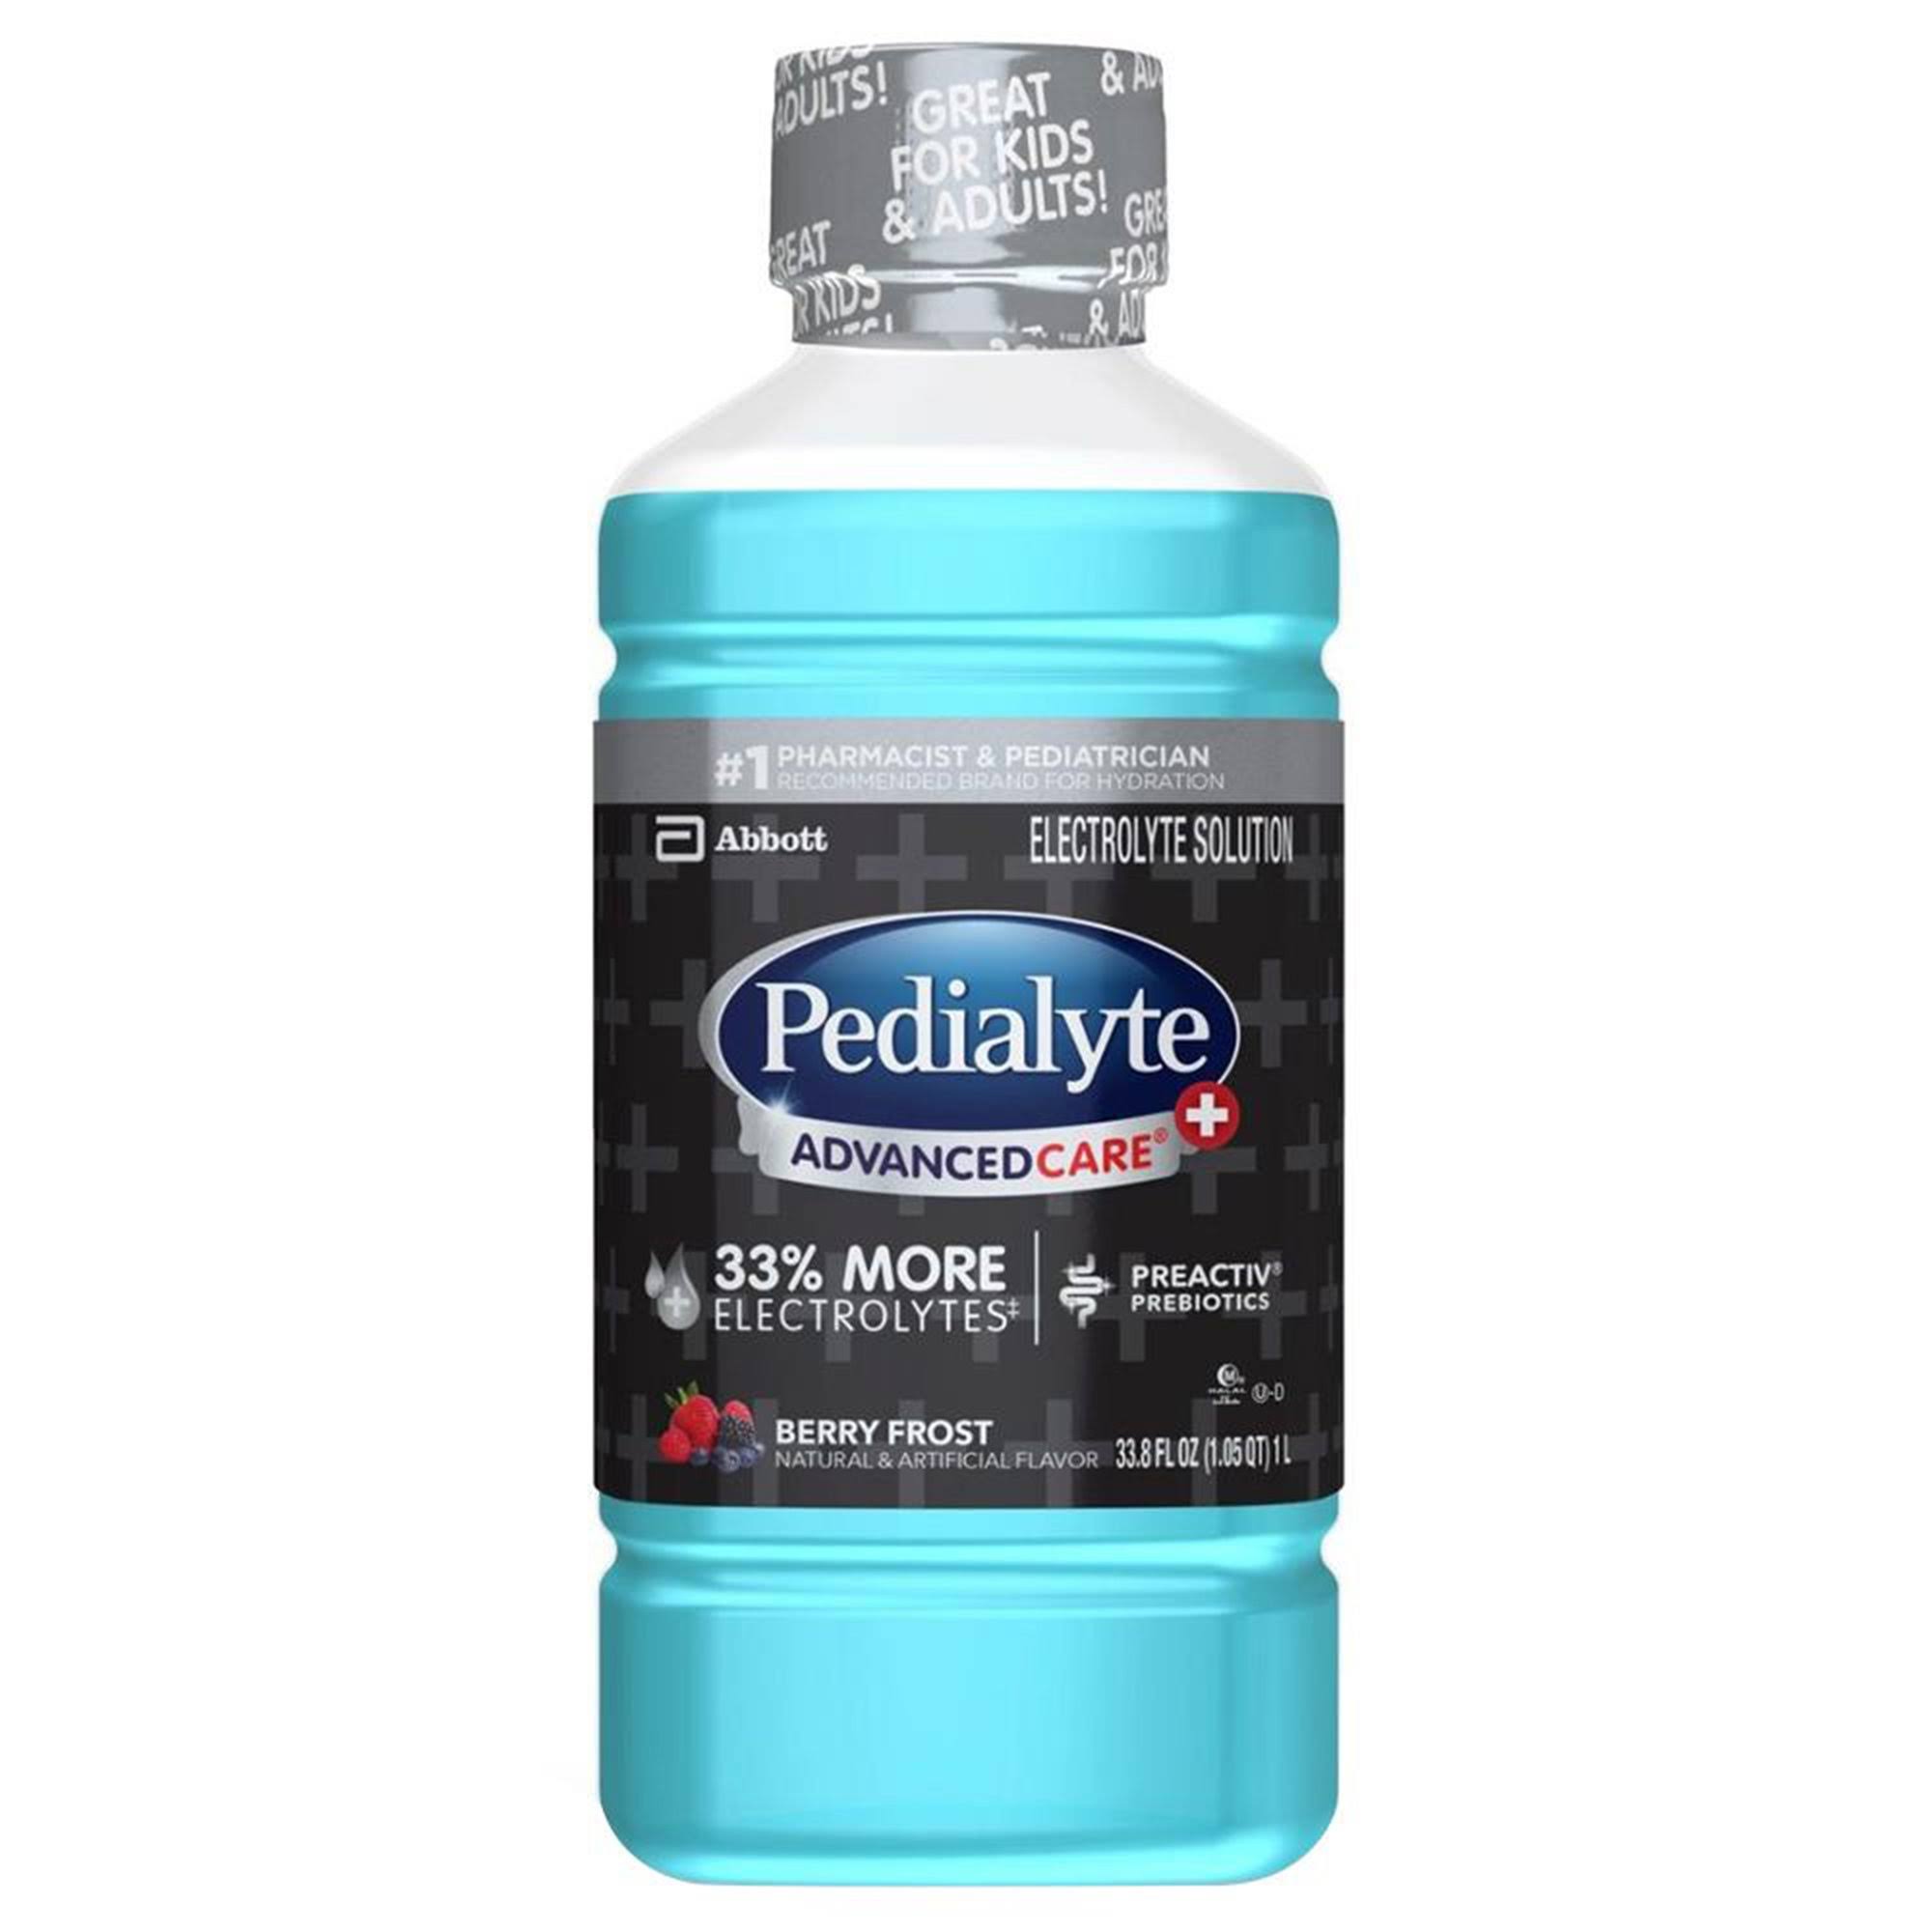 Pedialyte AdvancedCare Plus Electrolyte Solution with PreActiv Prebiotics Electrolyte Drink - Berry Frost, 35oz